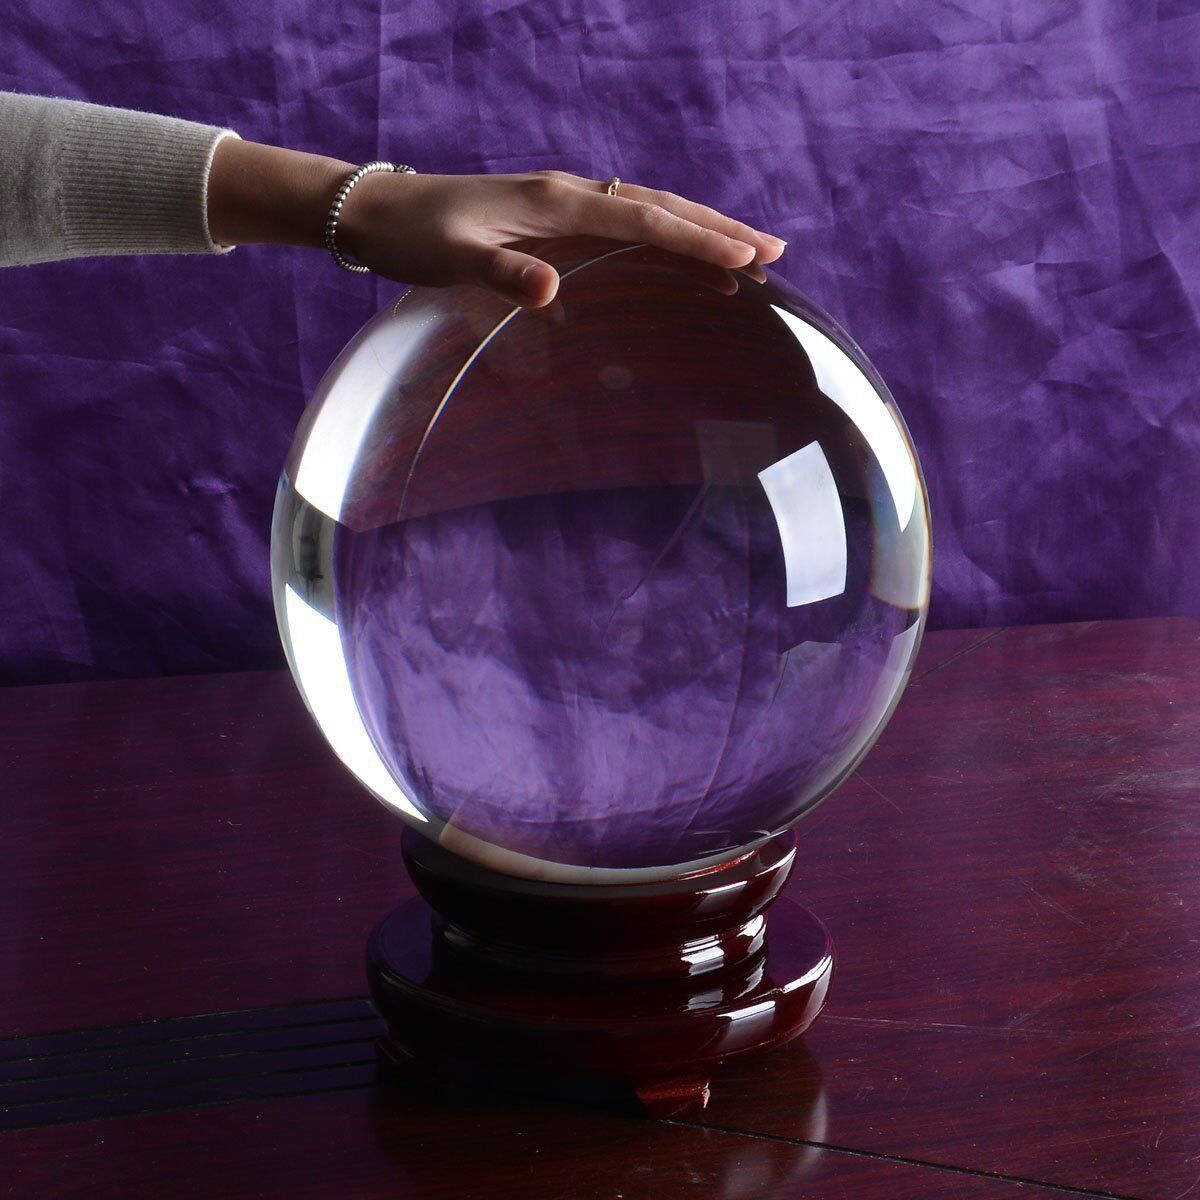 LONGWIN 250MM Clear Crystal Ball 10Inch Glass Sphere Photo Prop Free Stand